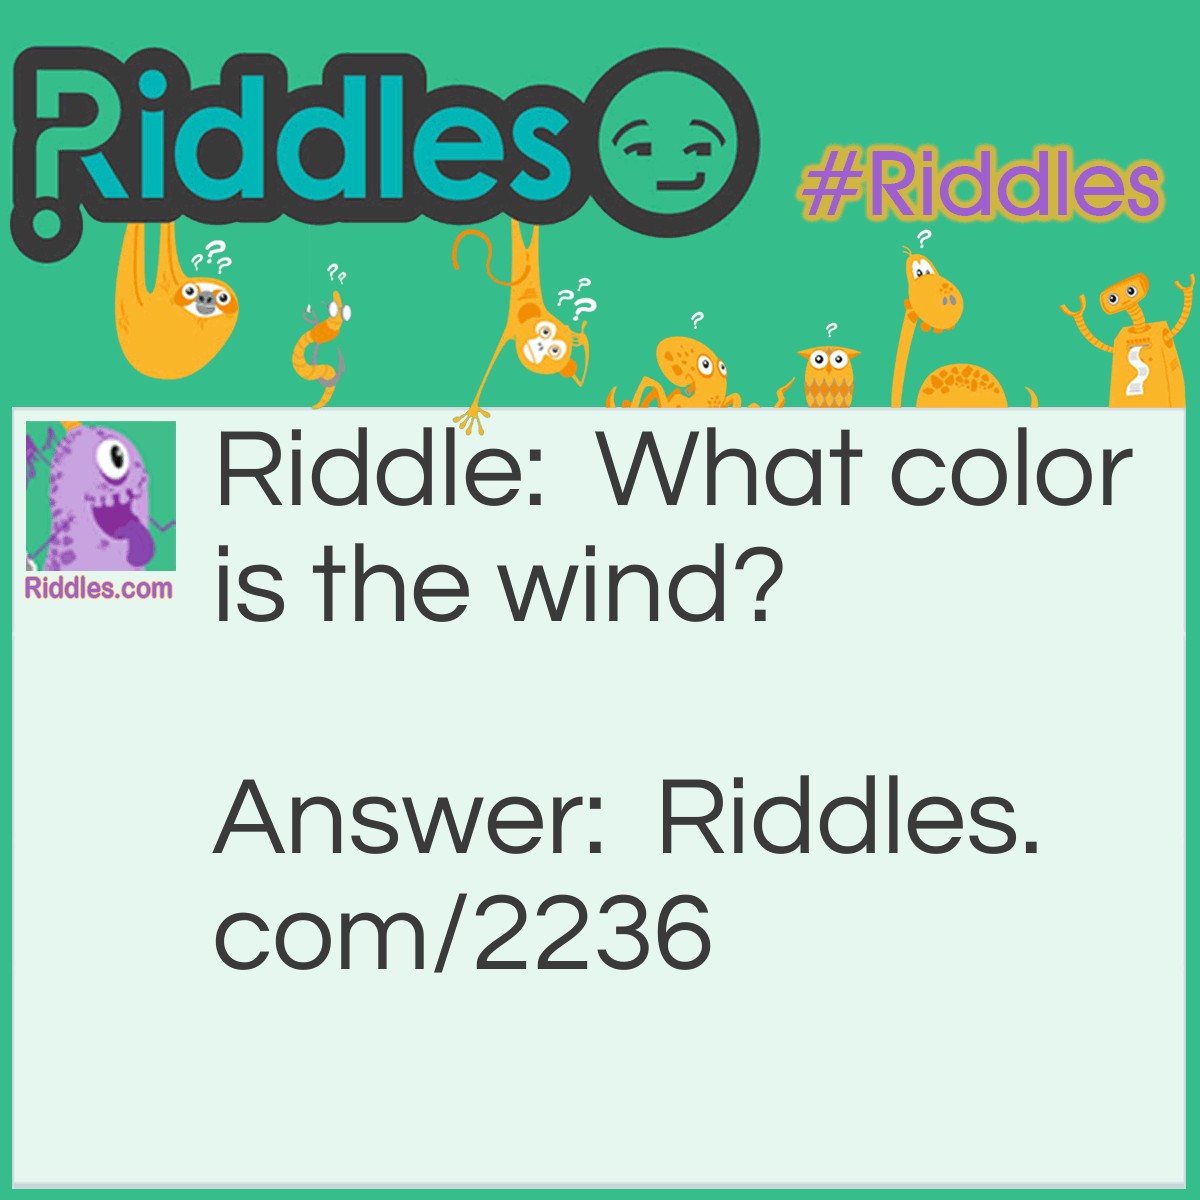 Riddle: What color is the wind? Answer: Blew.